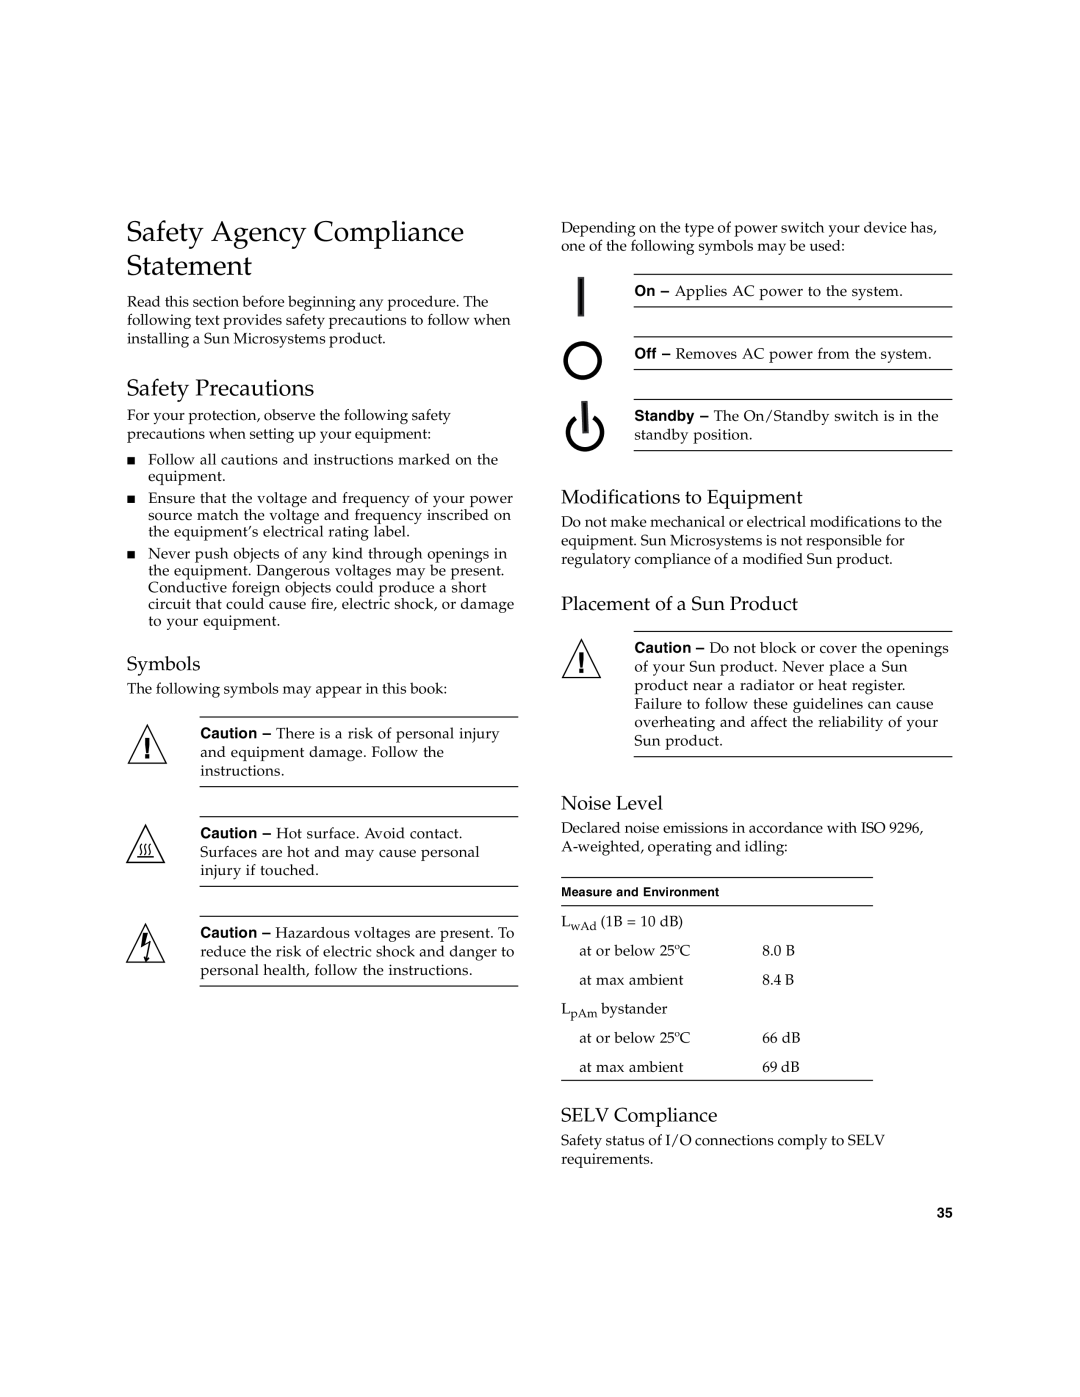 Sun Microsystems 2.0 manual Safety Agency Compliance Statement, Safety Precautions, Symbols, Modifications to Equipment 